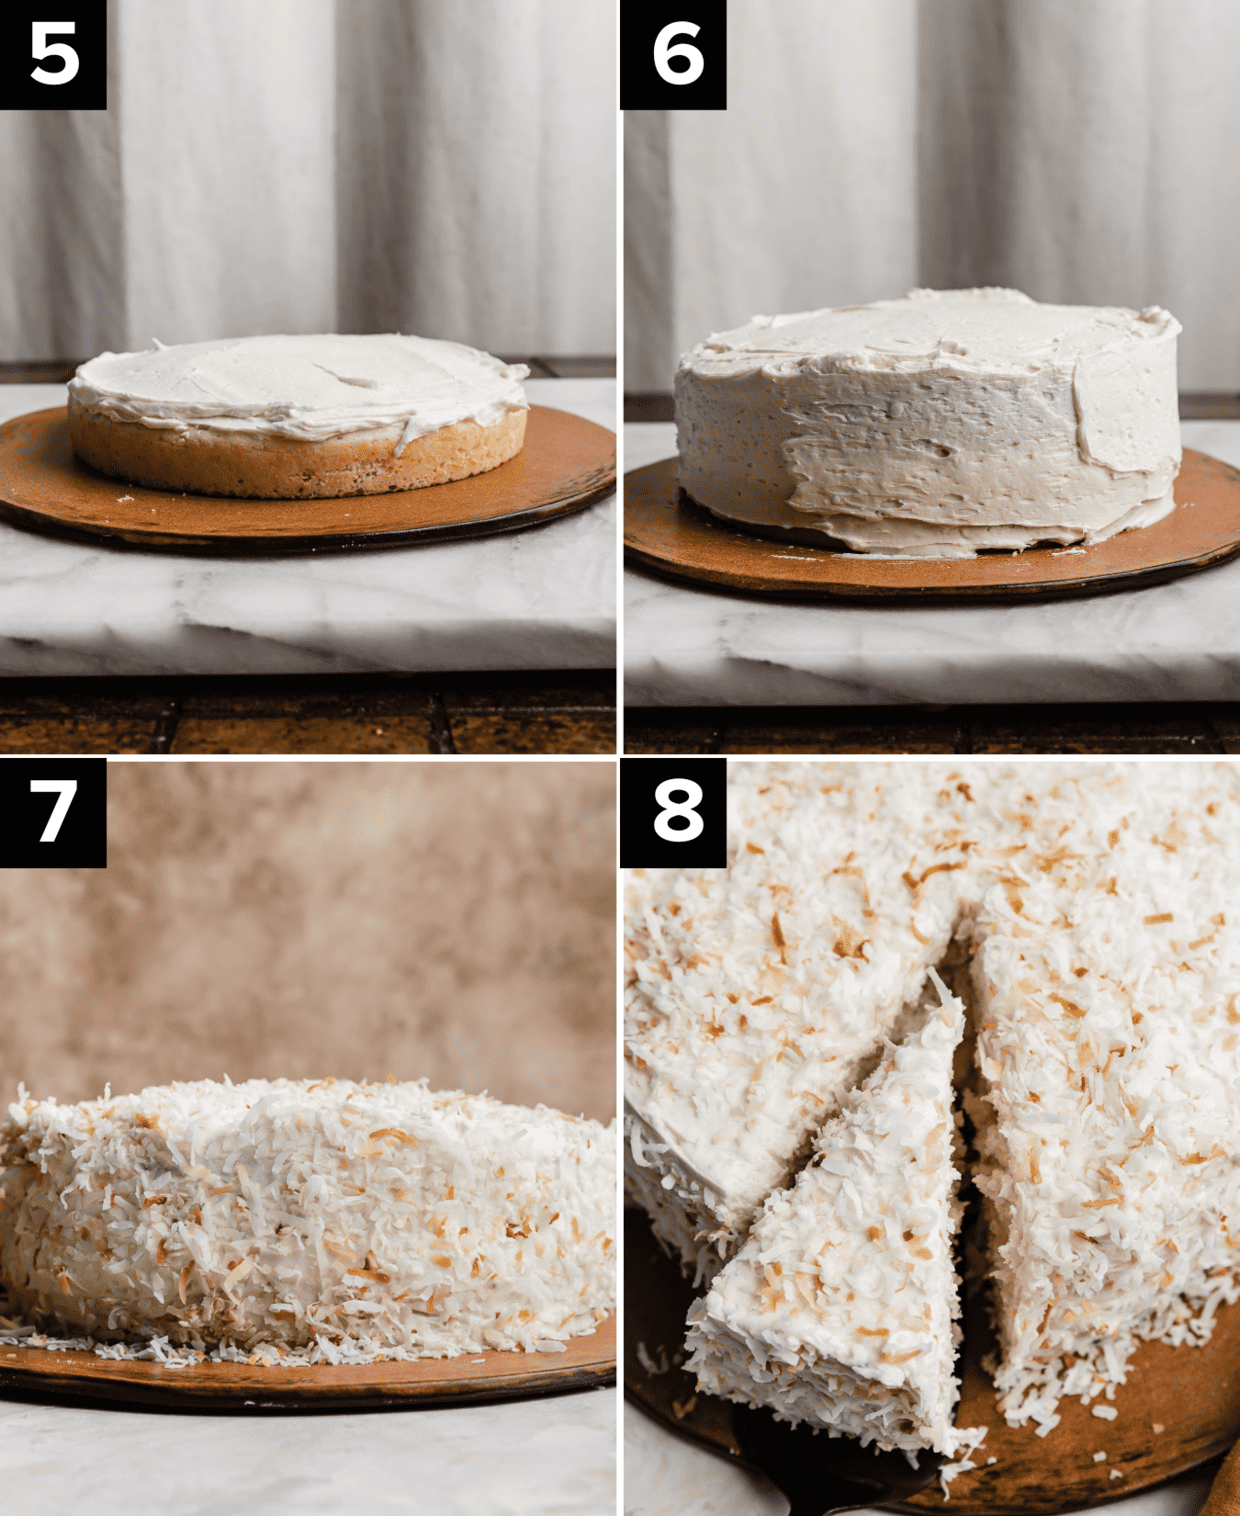 Four photos showing the frosting process of a double layer doctored cake mix Coconut Cake Recipe, with the final coconut cake frosted with a coconut cream frosting and topped with toasted coconut.